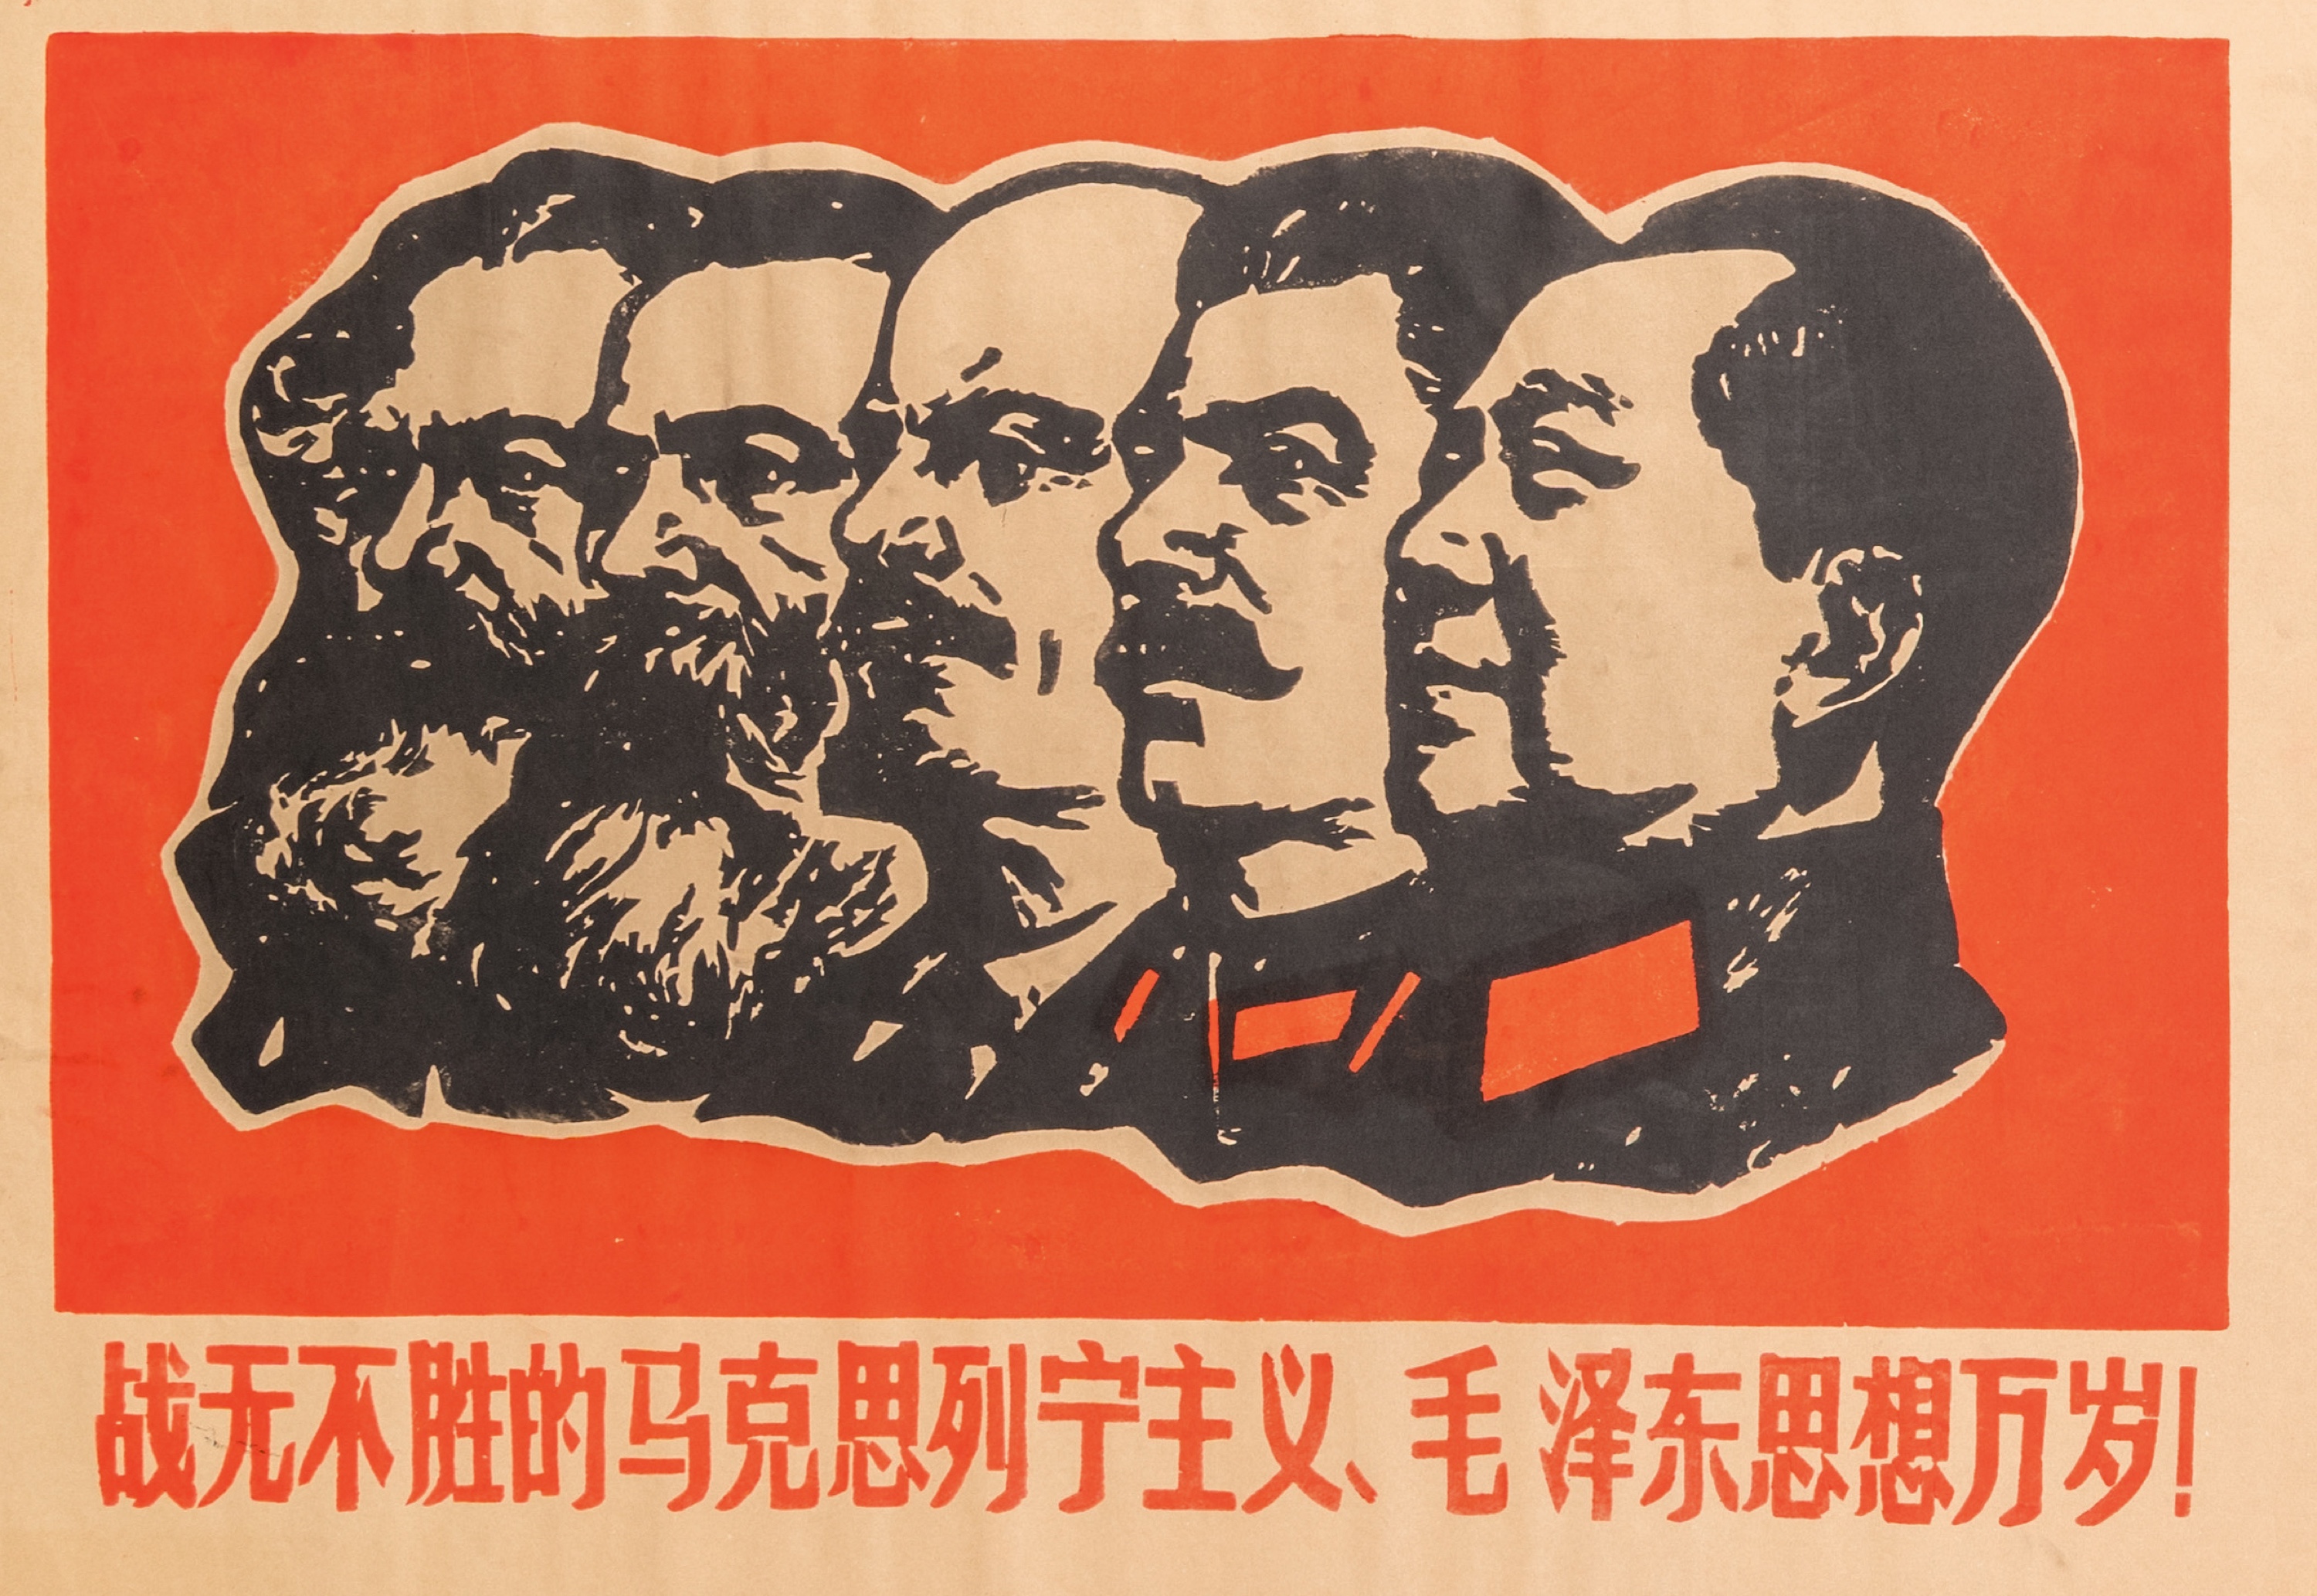 29 Chinese Cultural Revolution propaganda posters - Image 24 of 43